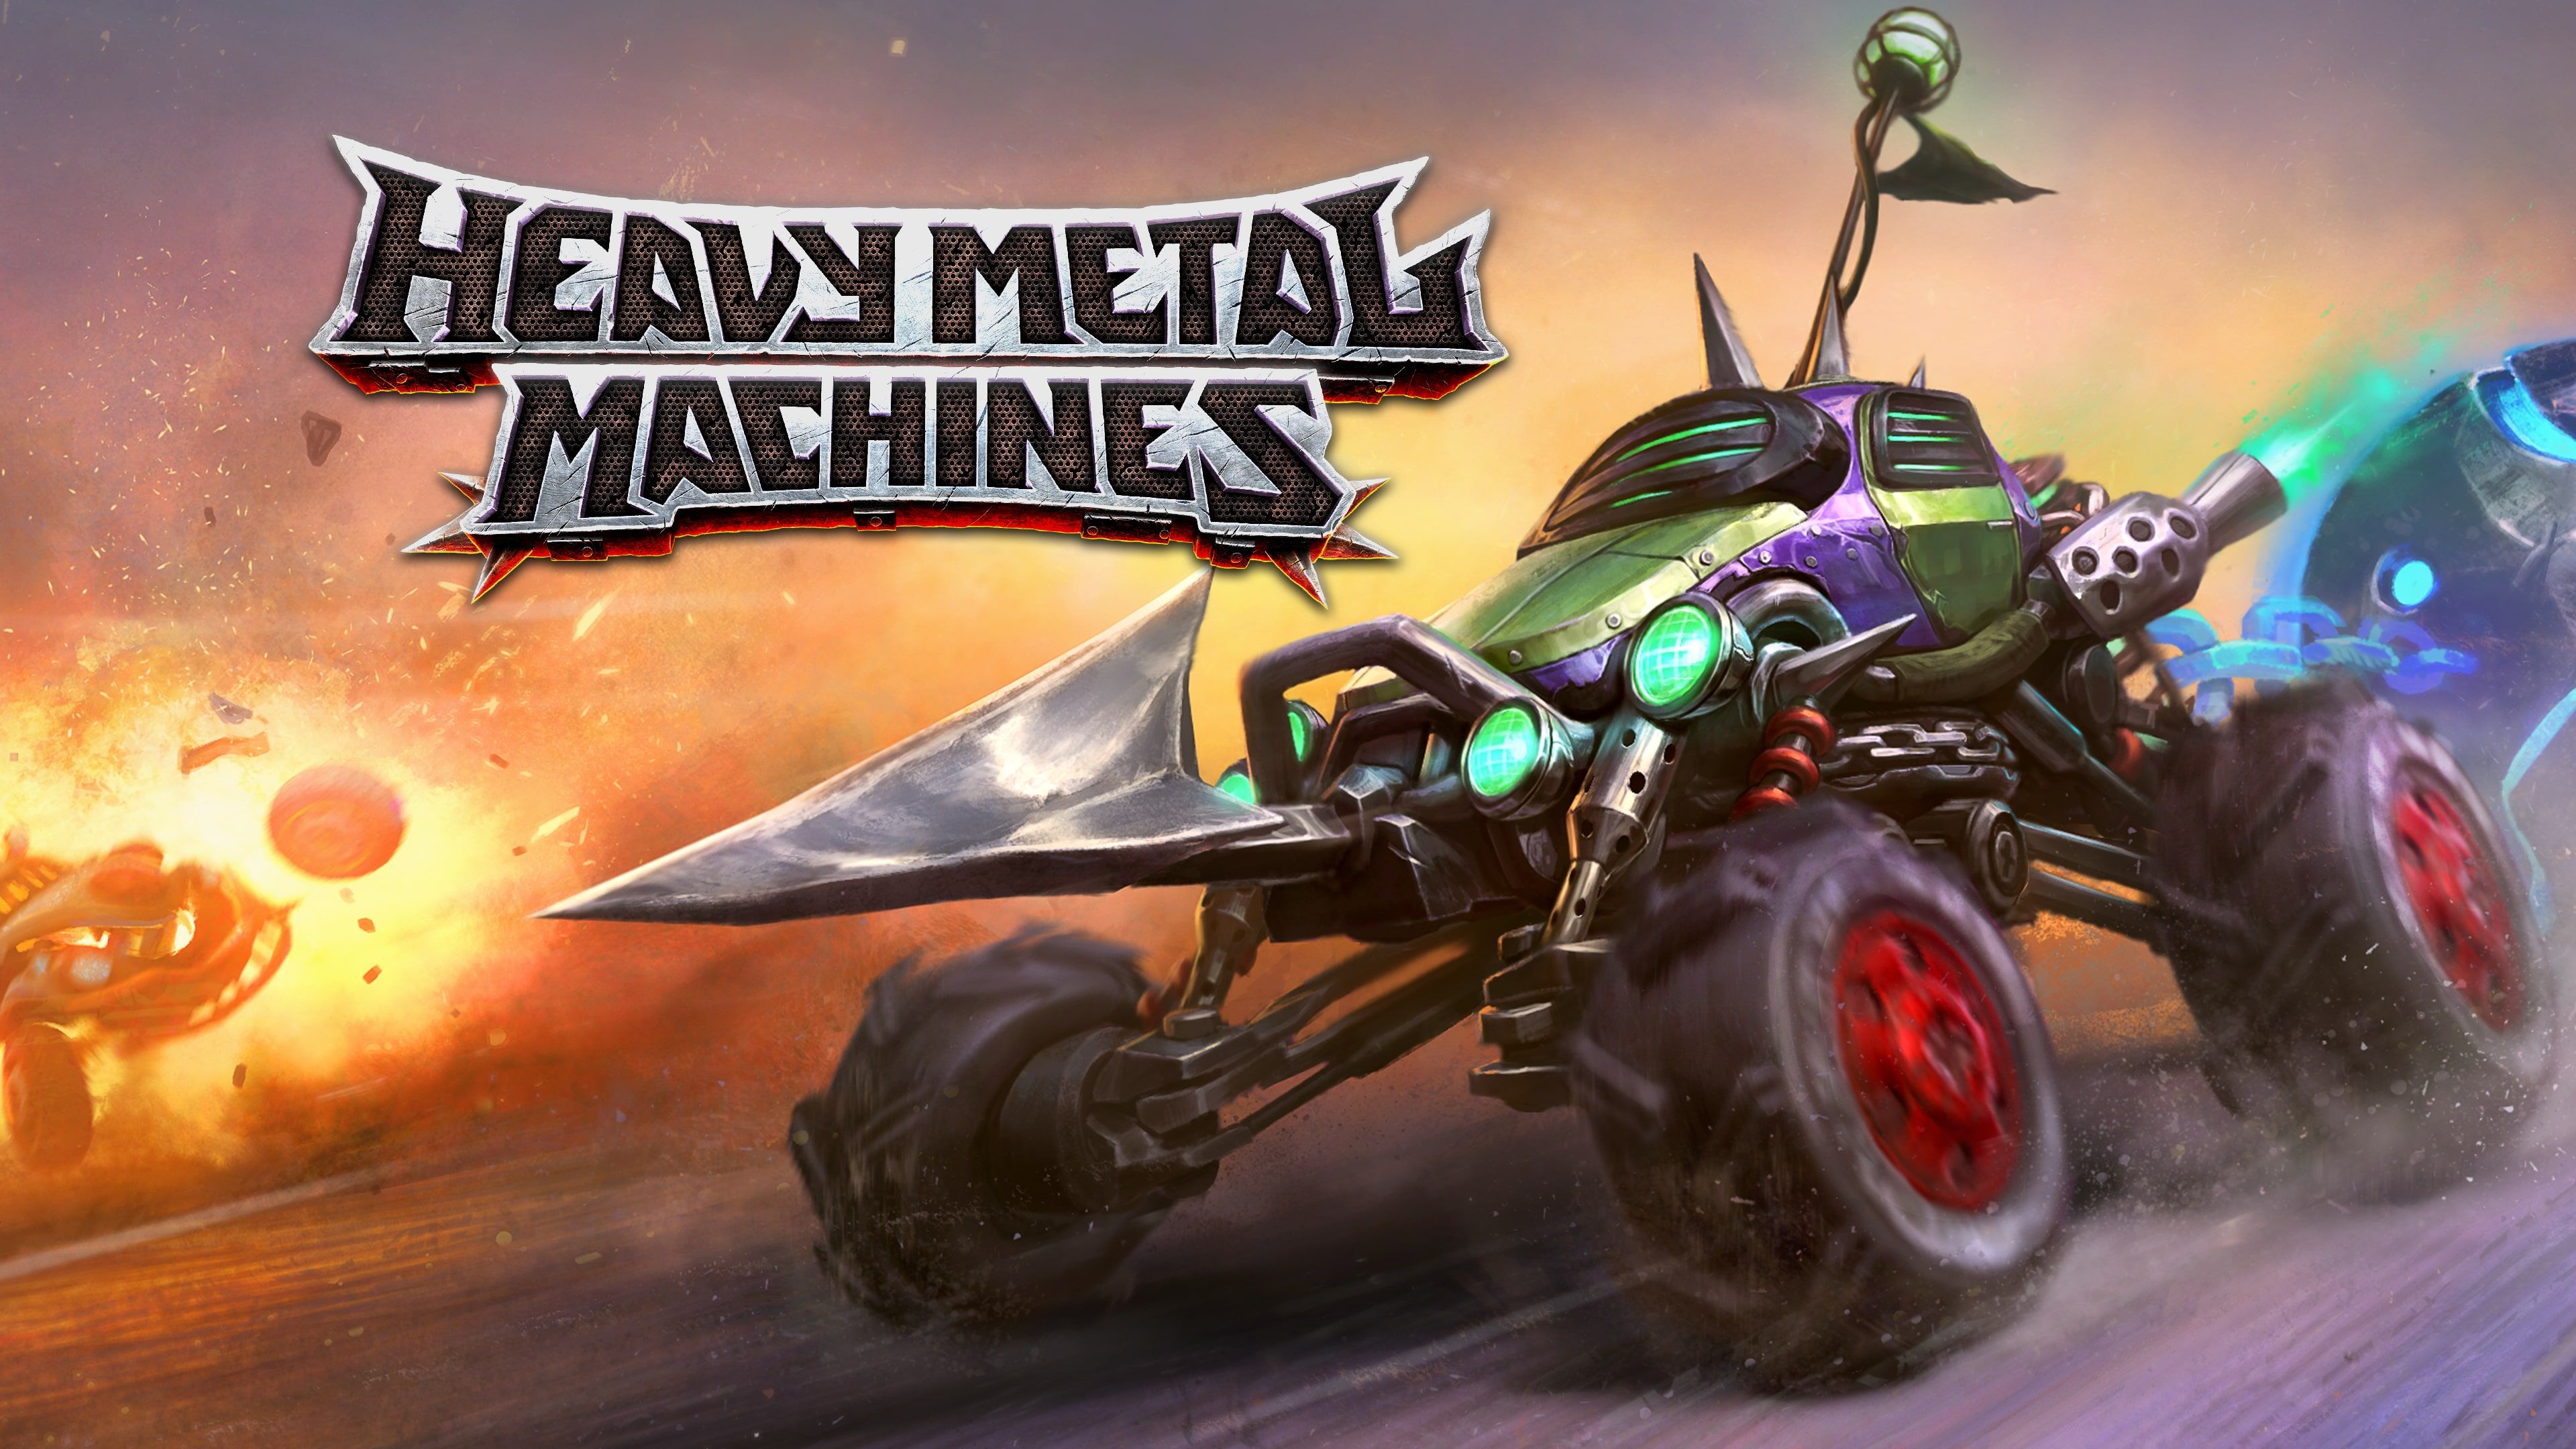 Heavy Metal Machines cover image